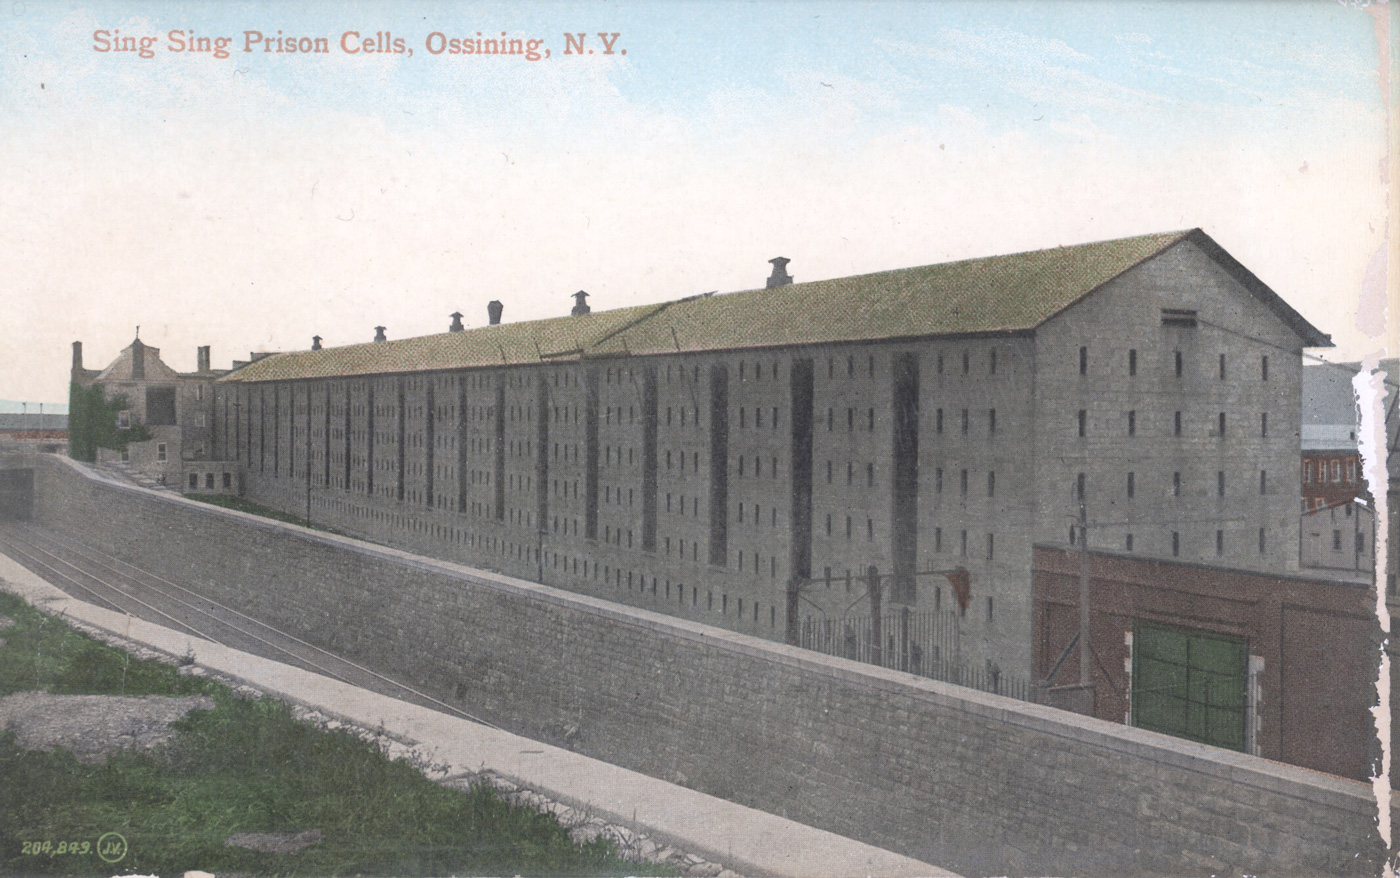 Original cellblock, view to the southwest of sing-sing prison